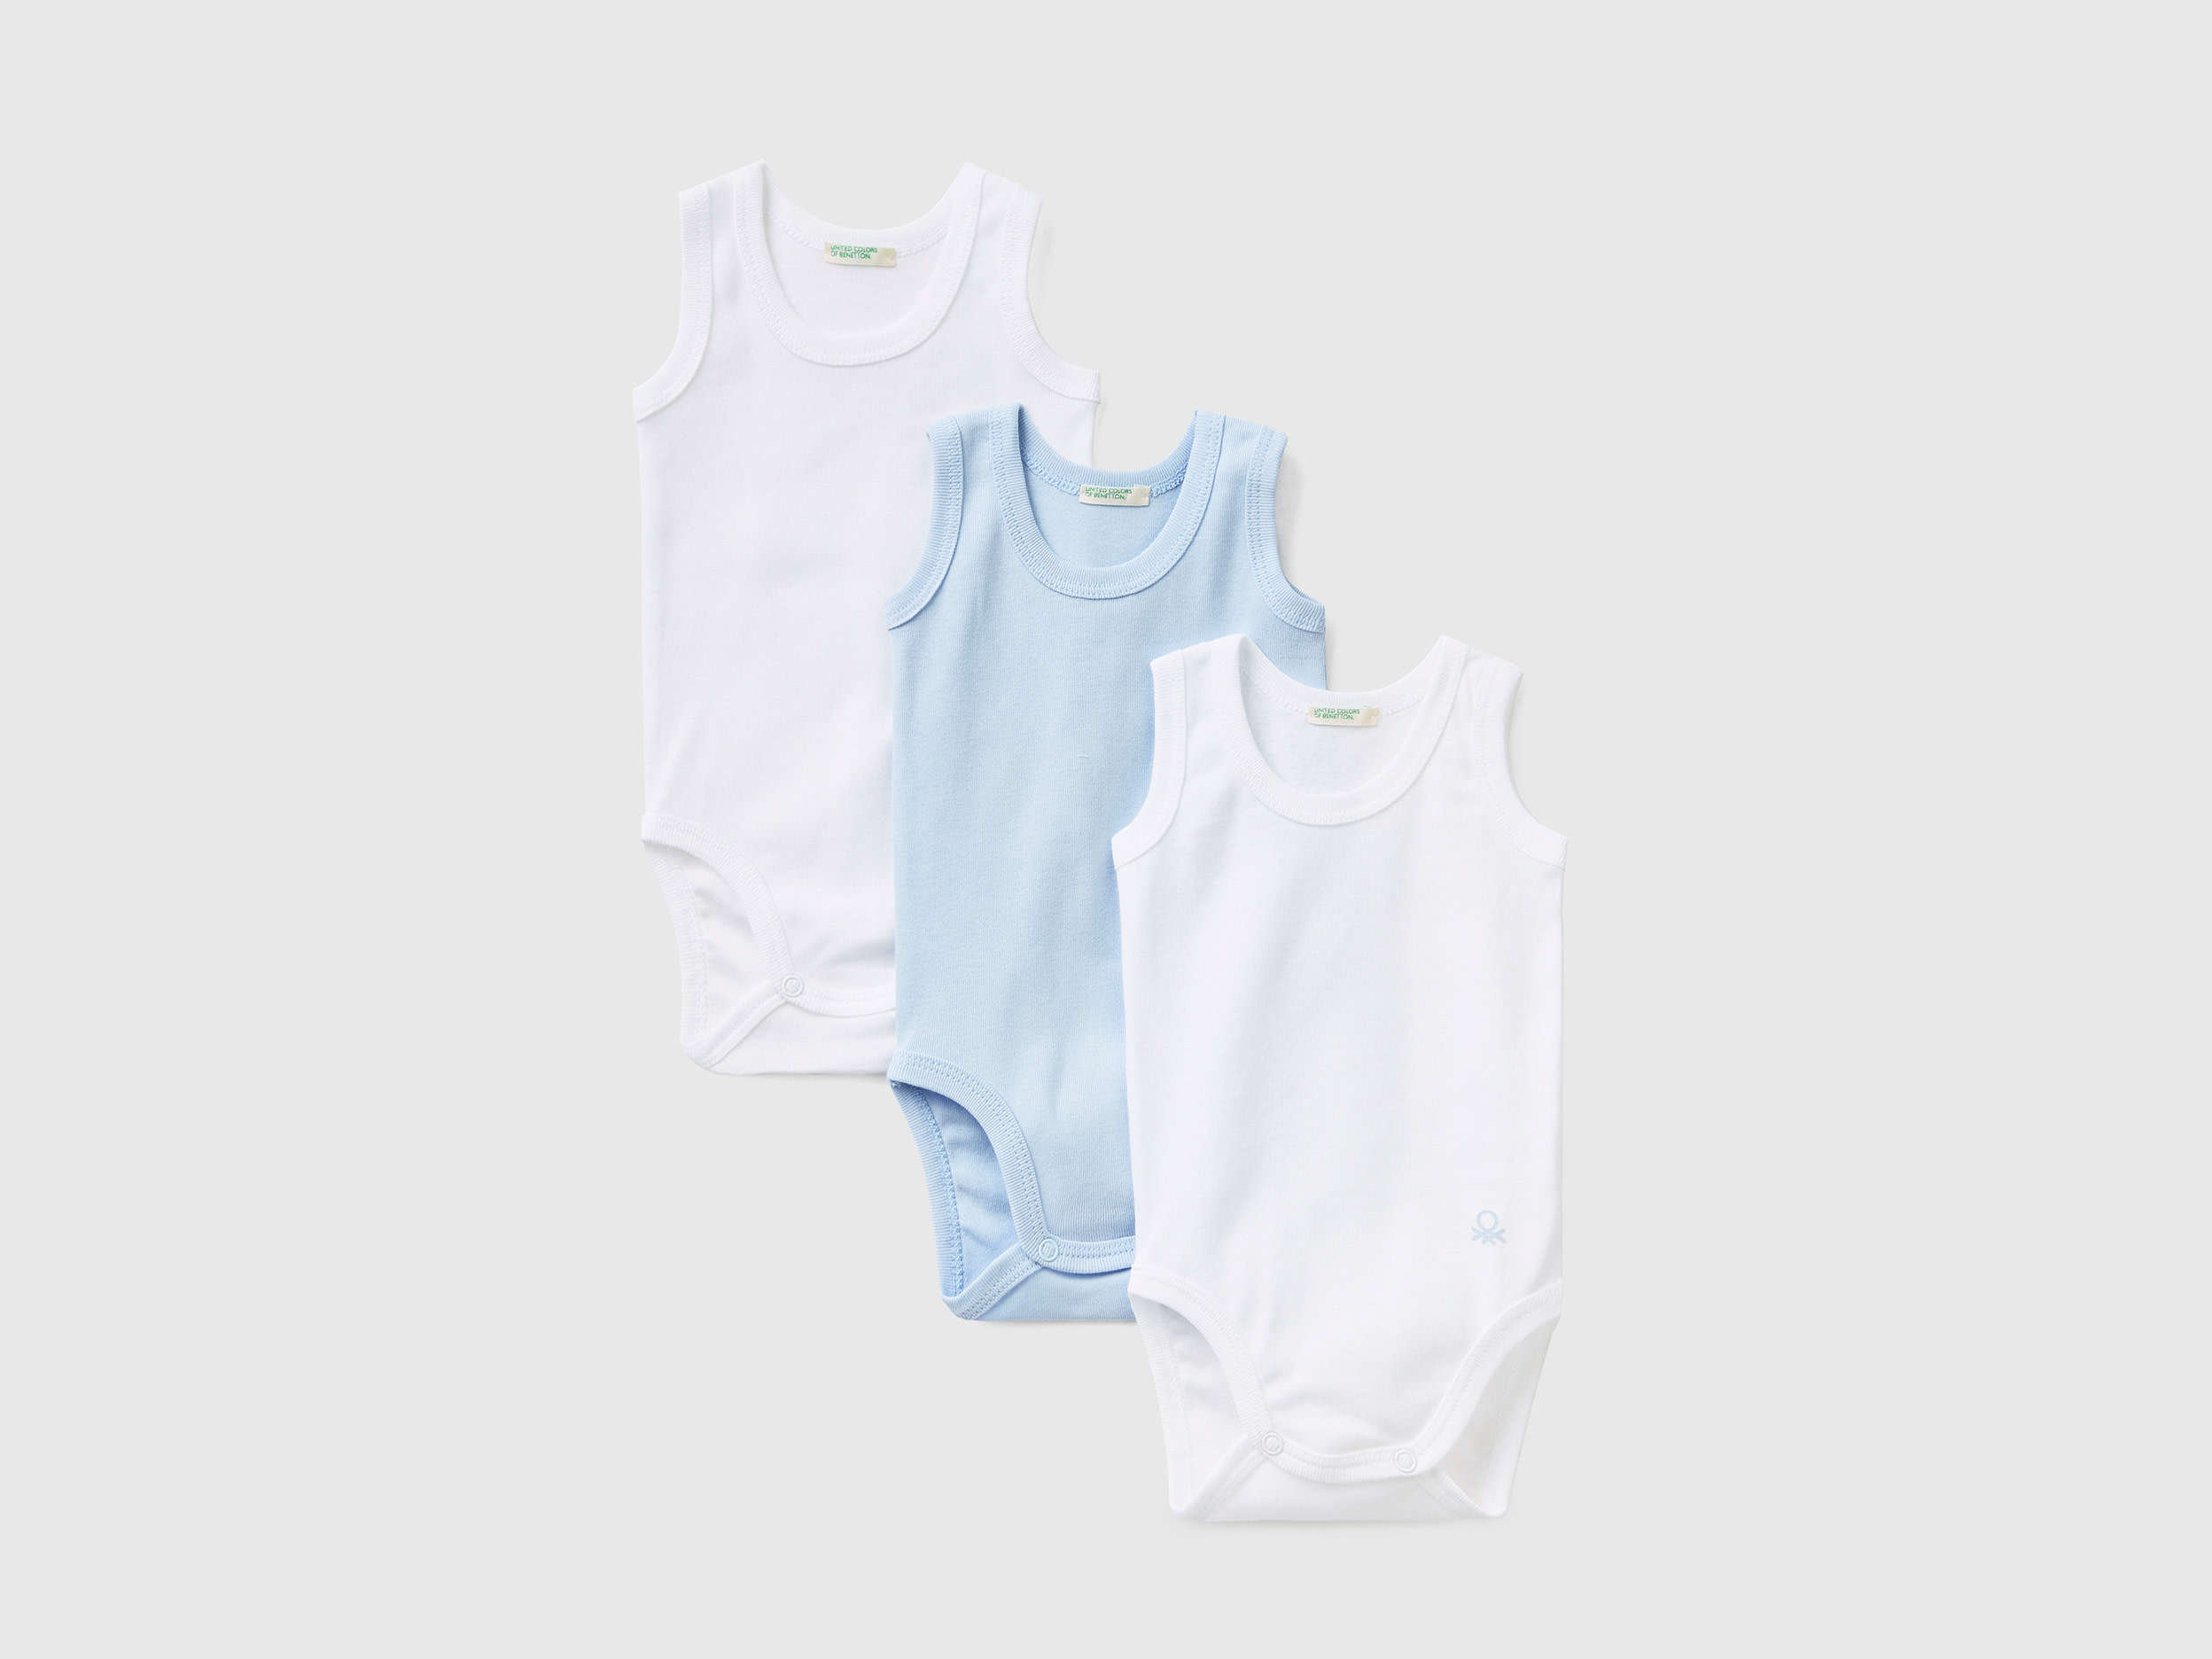 Benetton, Three Solid Color Tank Top Bodysuits, size 12-18, Light Blue, Kids